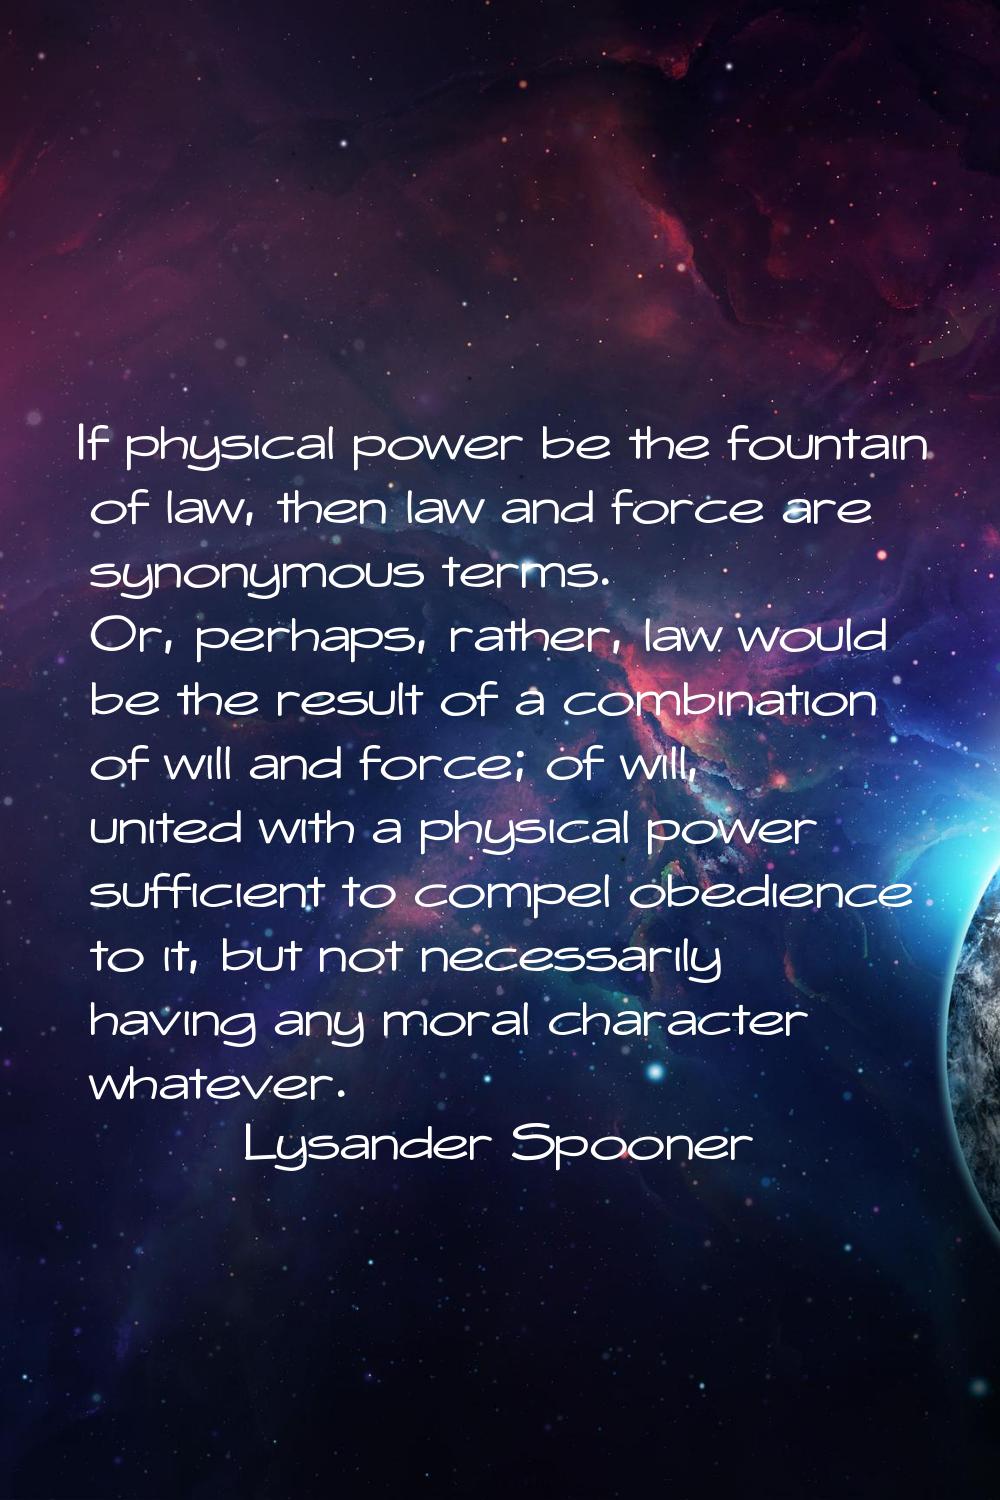 If physical power be the fountain of law, then law and force are synonymous terms. Or, perhaps, rat